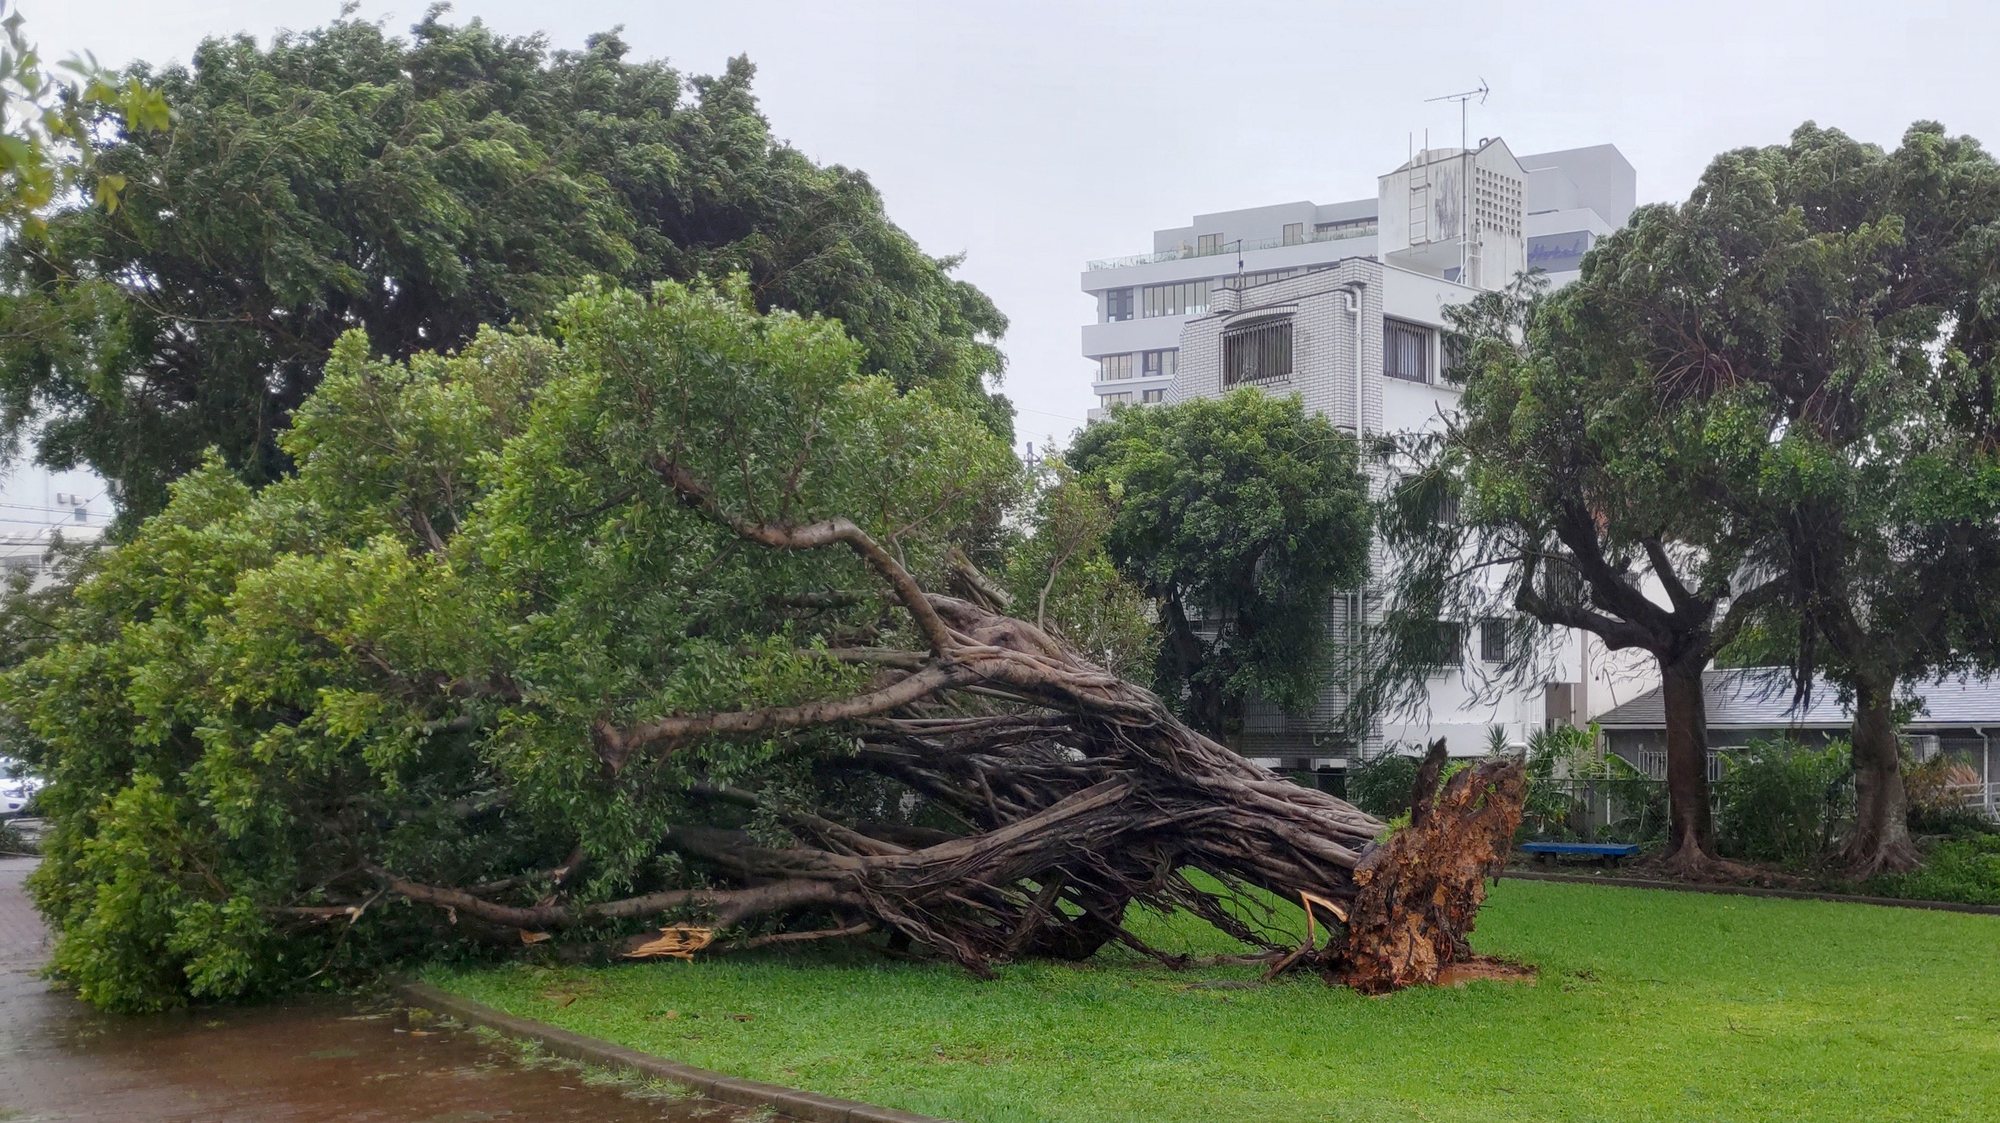 epa10780711 A tree that was uprooted by strong wind caused by Typhoon Khanun lays in a field in Naha, Okinawa Prefecture, Japan, 02 August 2023. The powerful typhoon, which is a central air pressure of 930 hectopascals and a wind velocity of 50 meters per second, forced the cancellation of over 400 flights and the loss of electric power at more than 200,000 houses in the prefecture.  EPA/JIJI PRESS JAPAN OUT EDITORIAL USE ONLY/